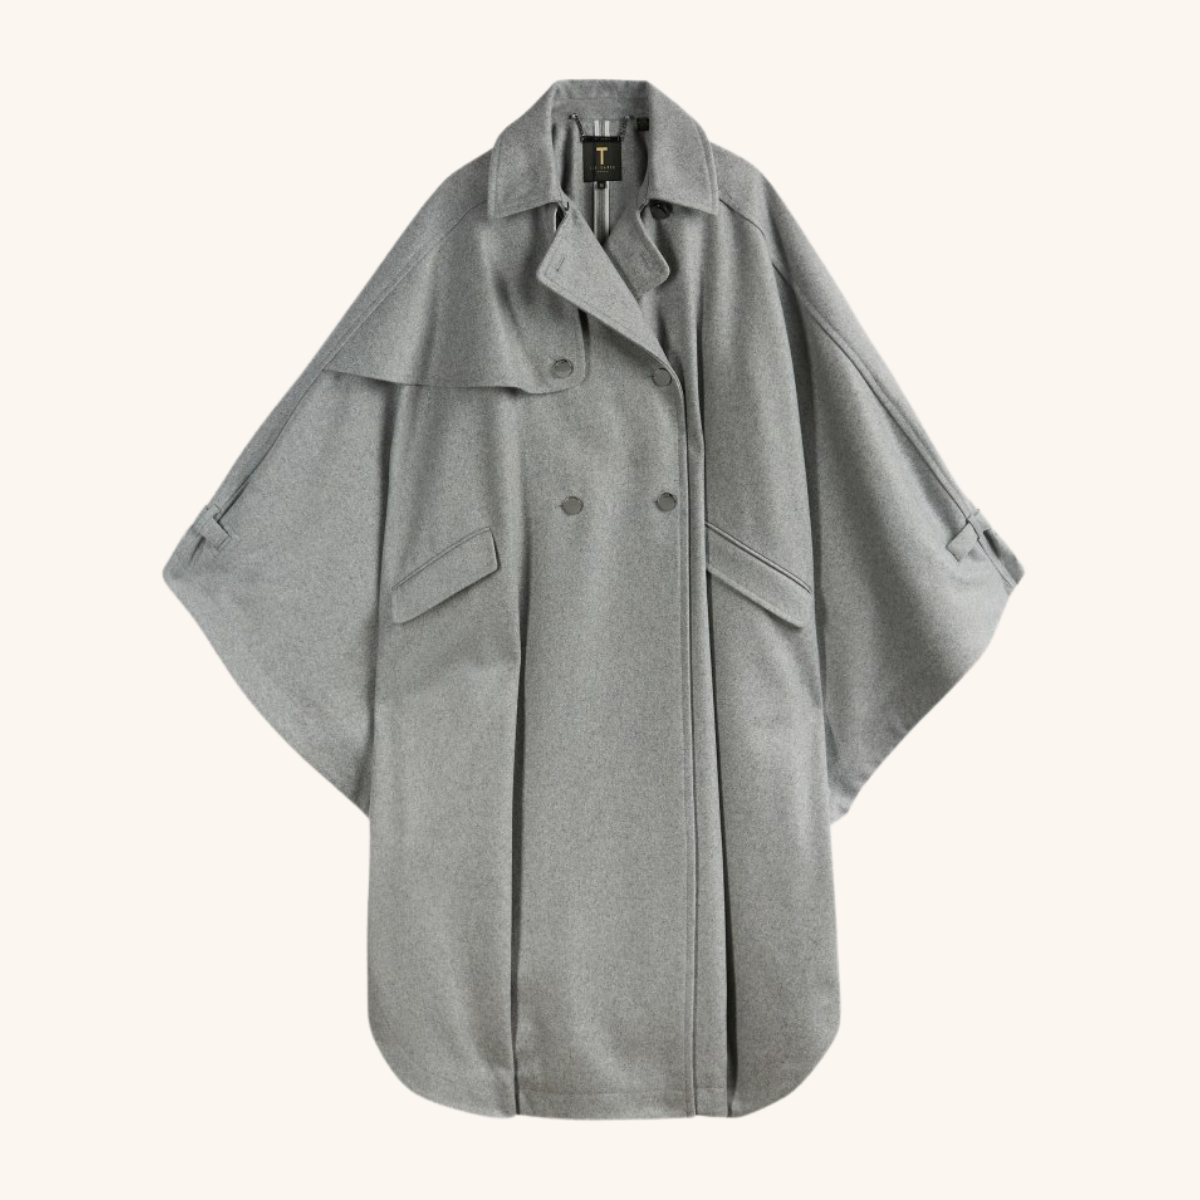   Ted Baker Wendiyy Flood-Length Wool Trench Cape, $458  